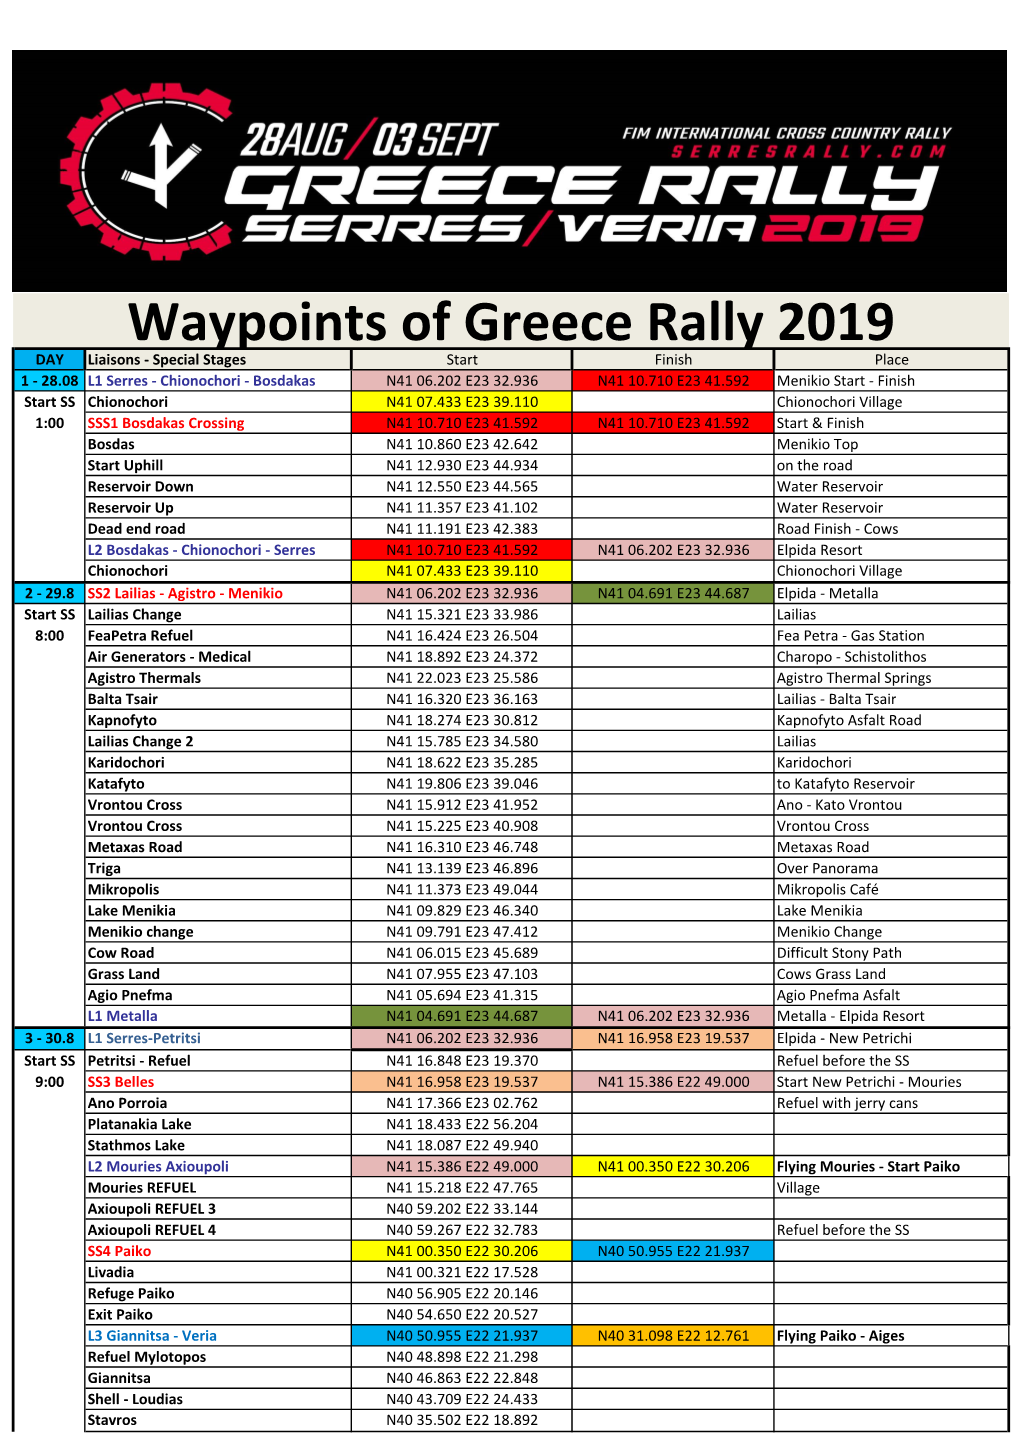 Waypoints of Greece Rally 2019